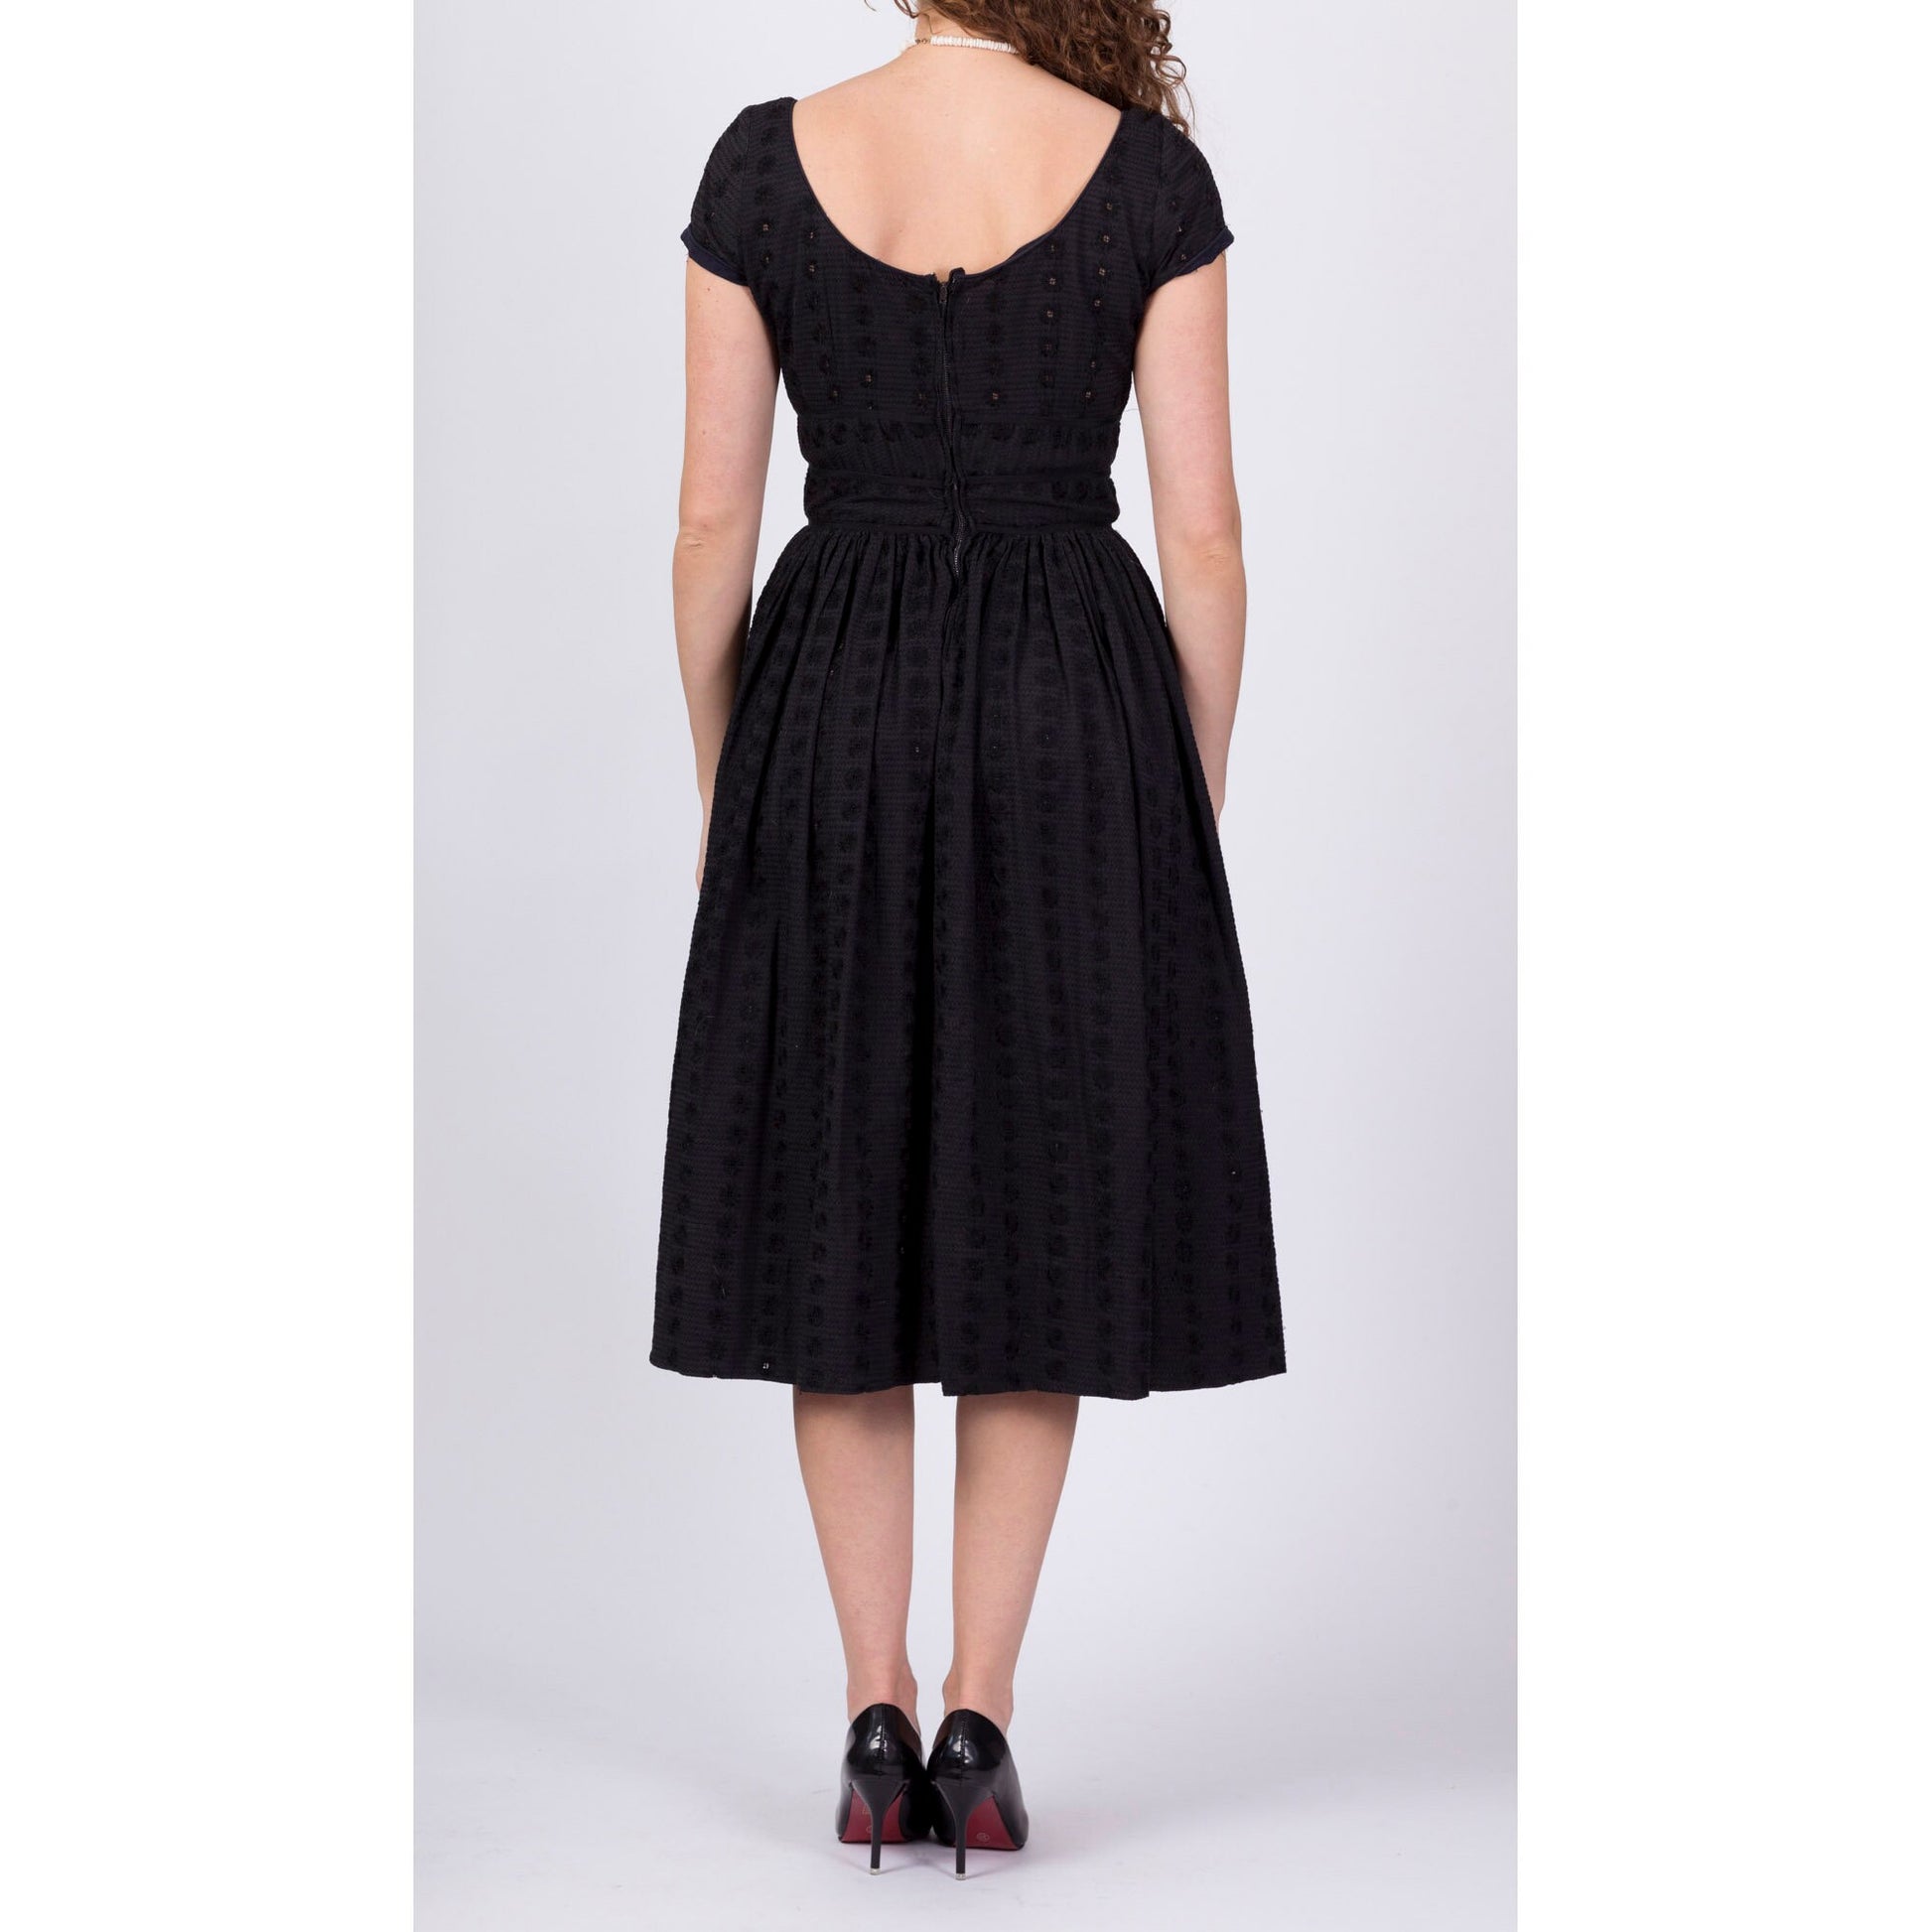 1950s Jerry Gilden Black Eyelet Fit & Flare Cocktail Dress - Extra Small 